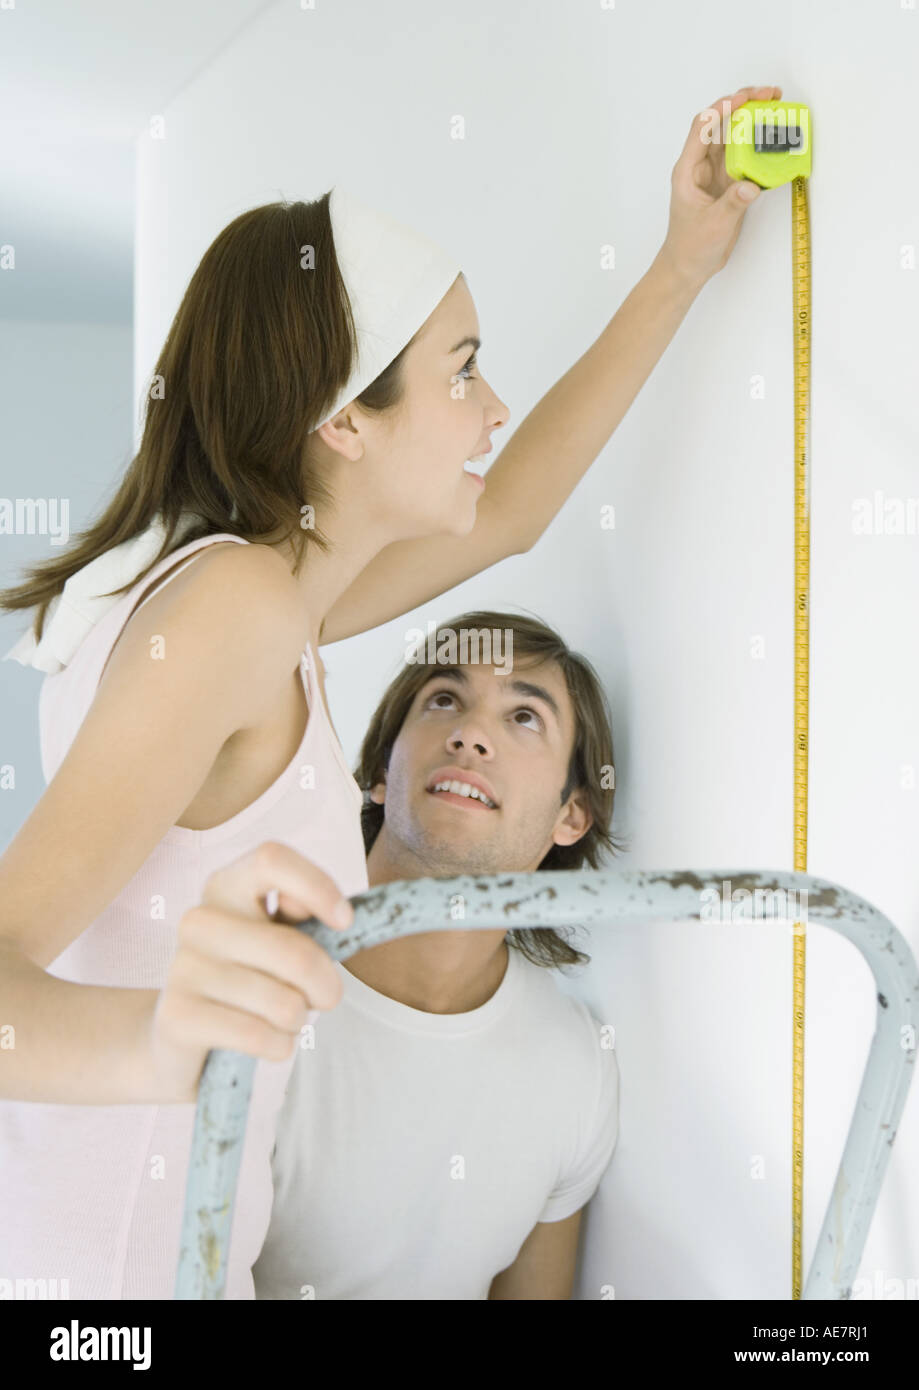 Woman on ladder using measuring tape as man watches Stock Photo